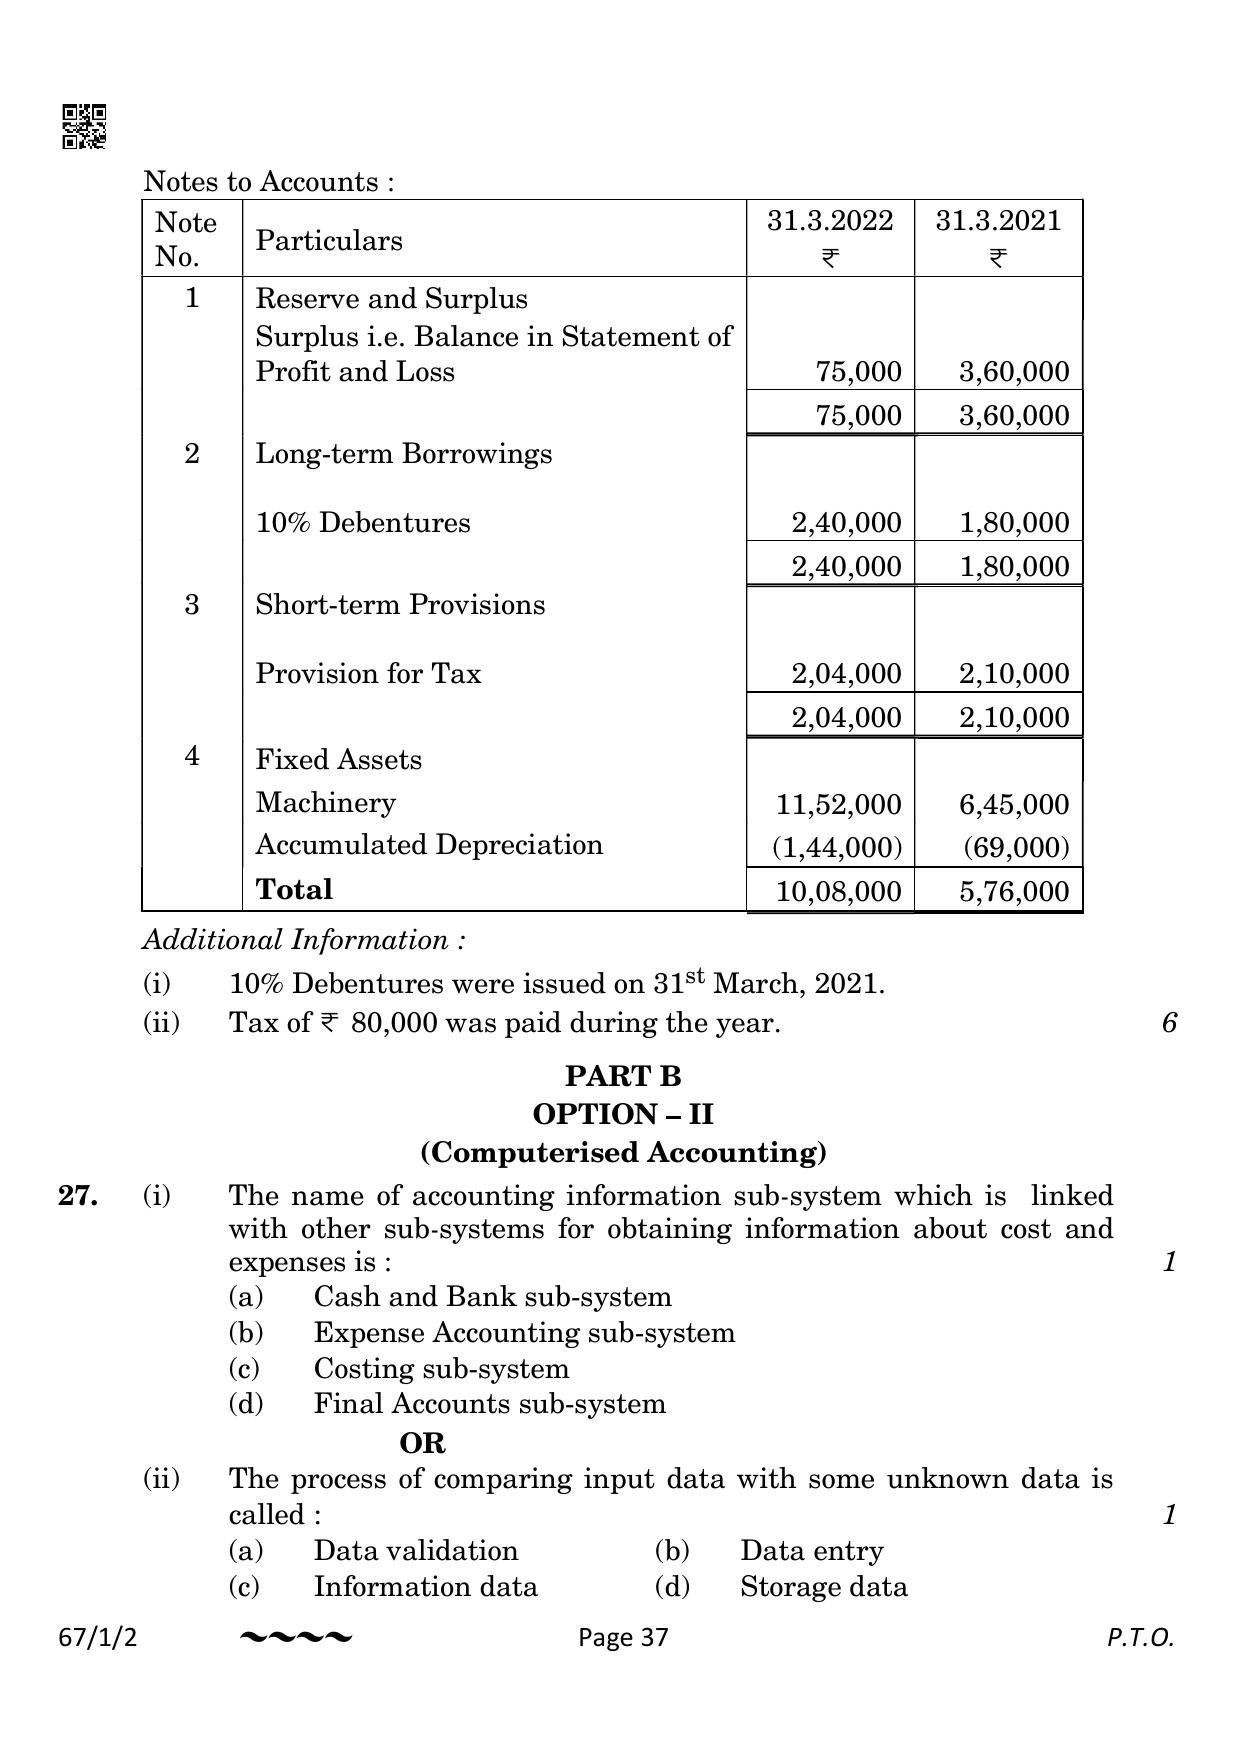 CBSE Class 12 67-1-2 Accountancy 2023 Question Paper - Page 37